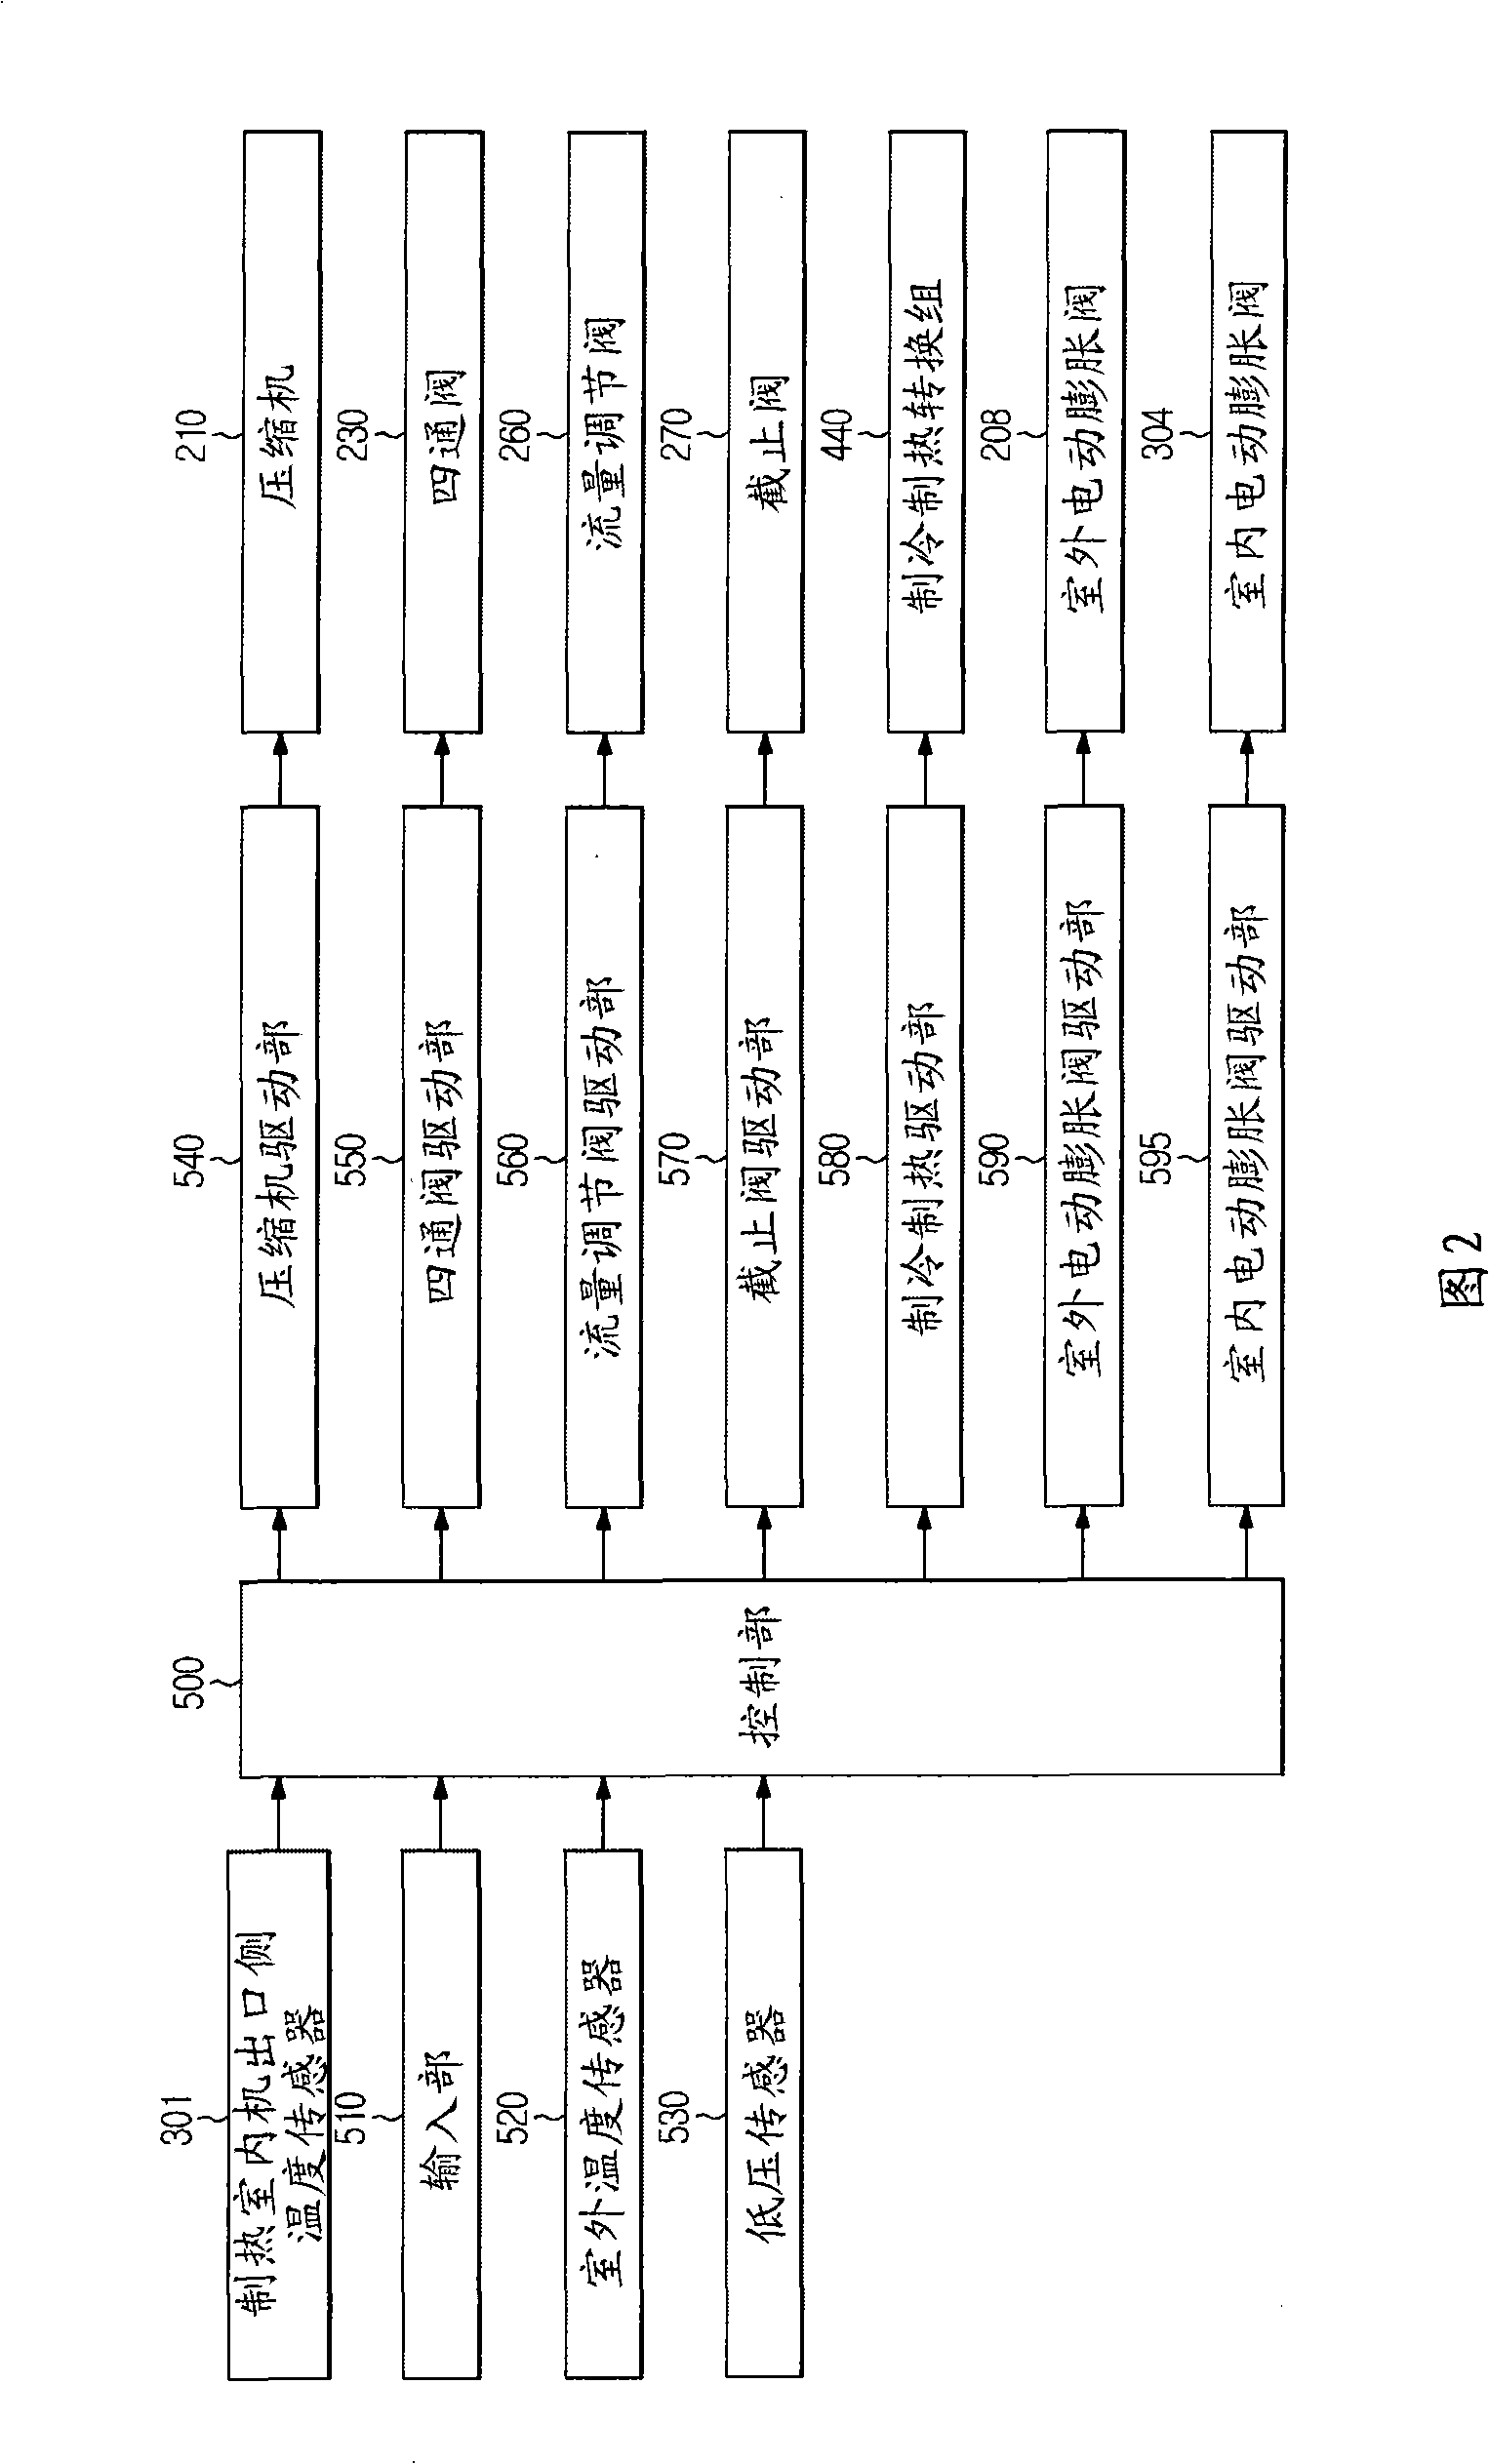 Multi air-conditioner for simultaneously cooling/heating and method for controlling the same